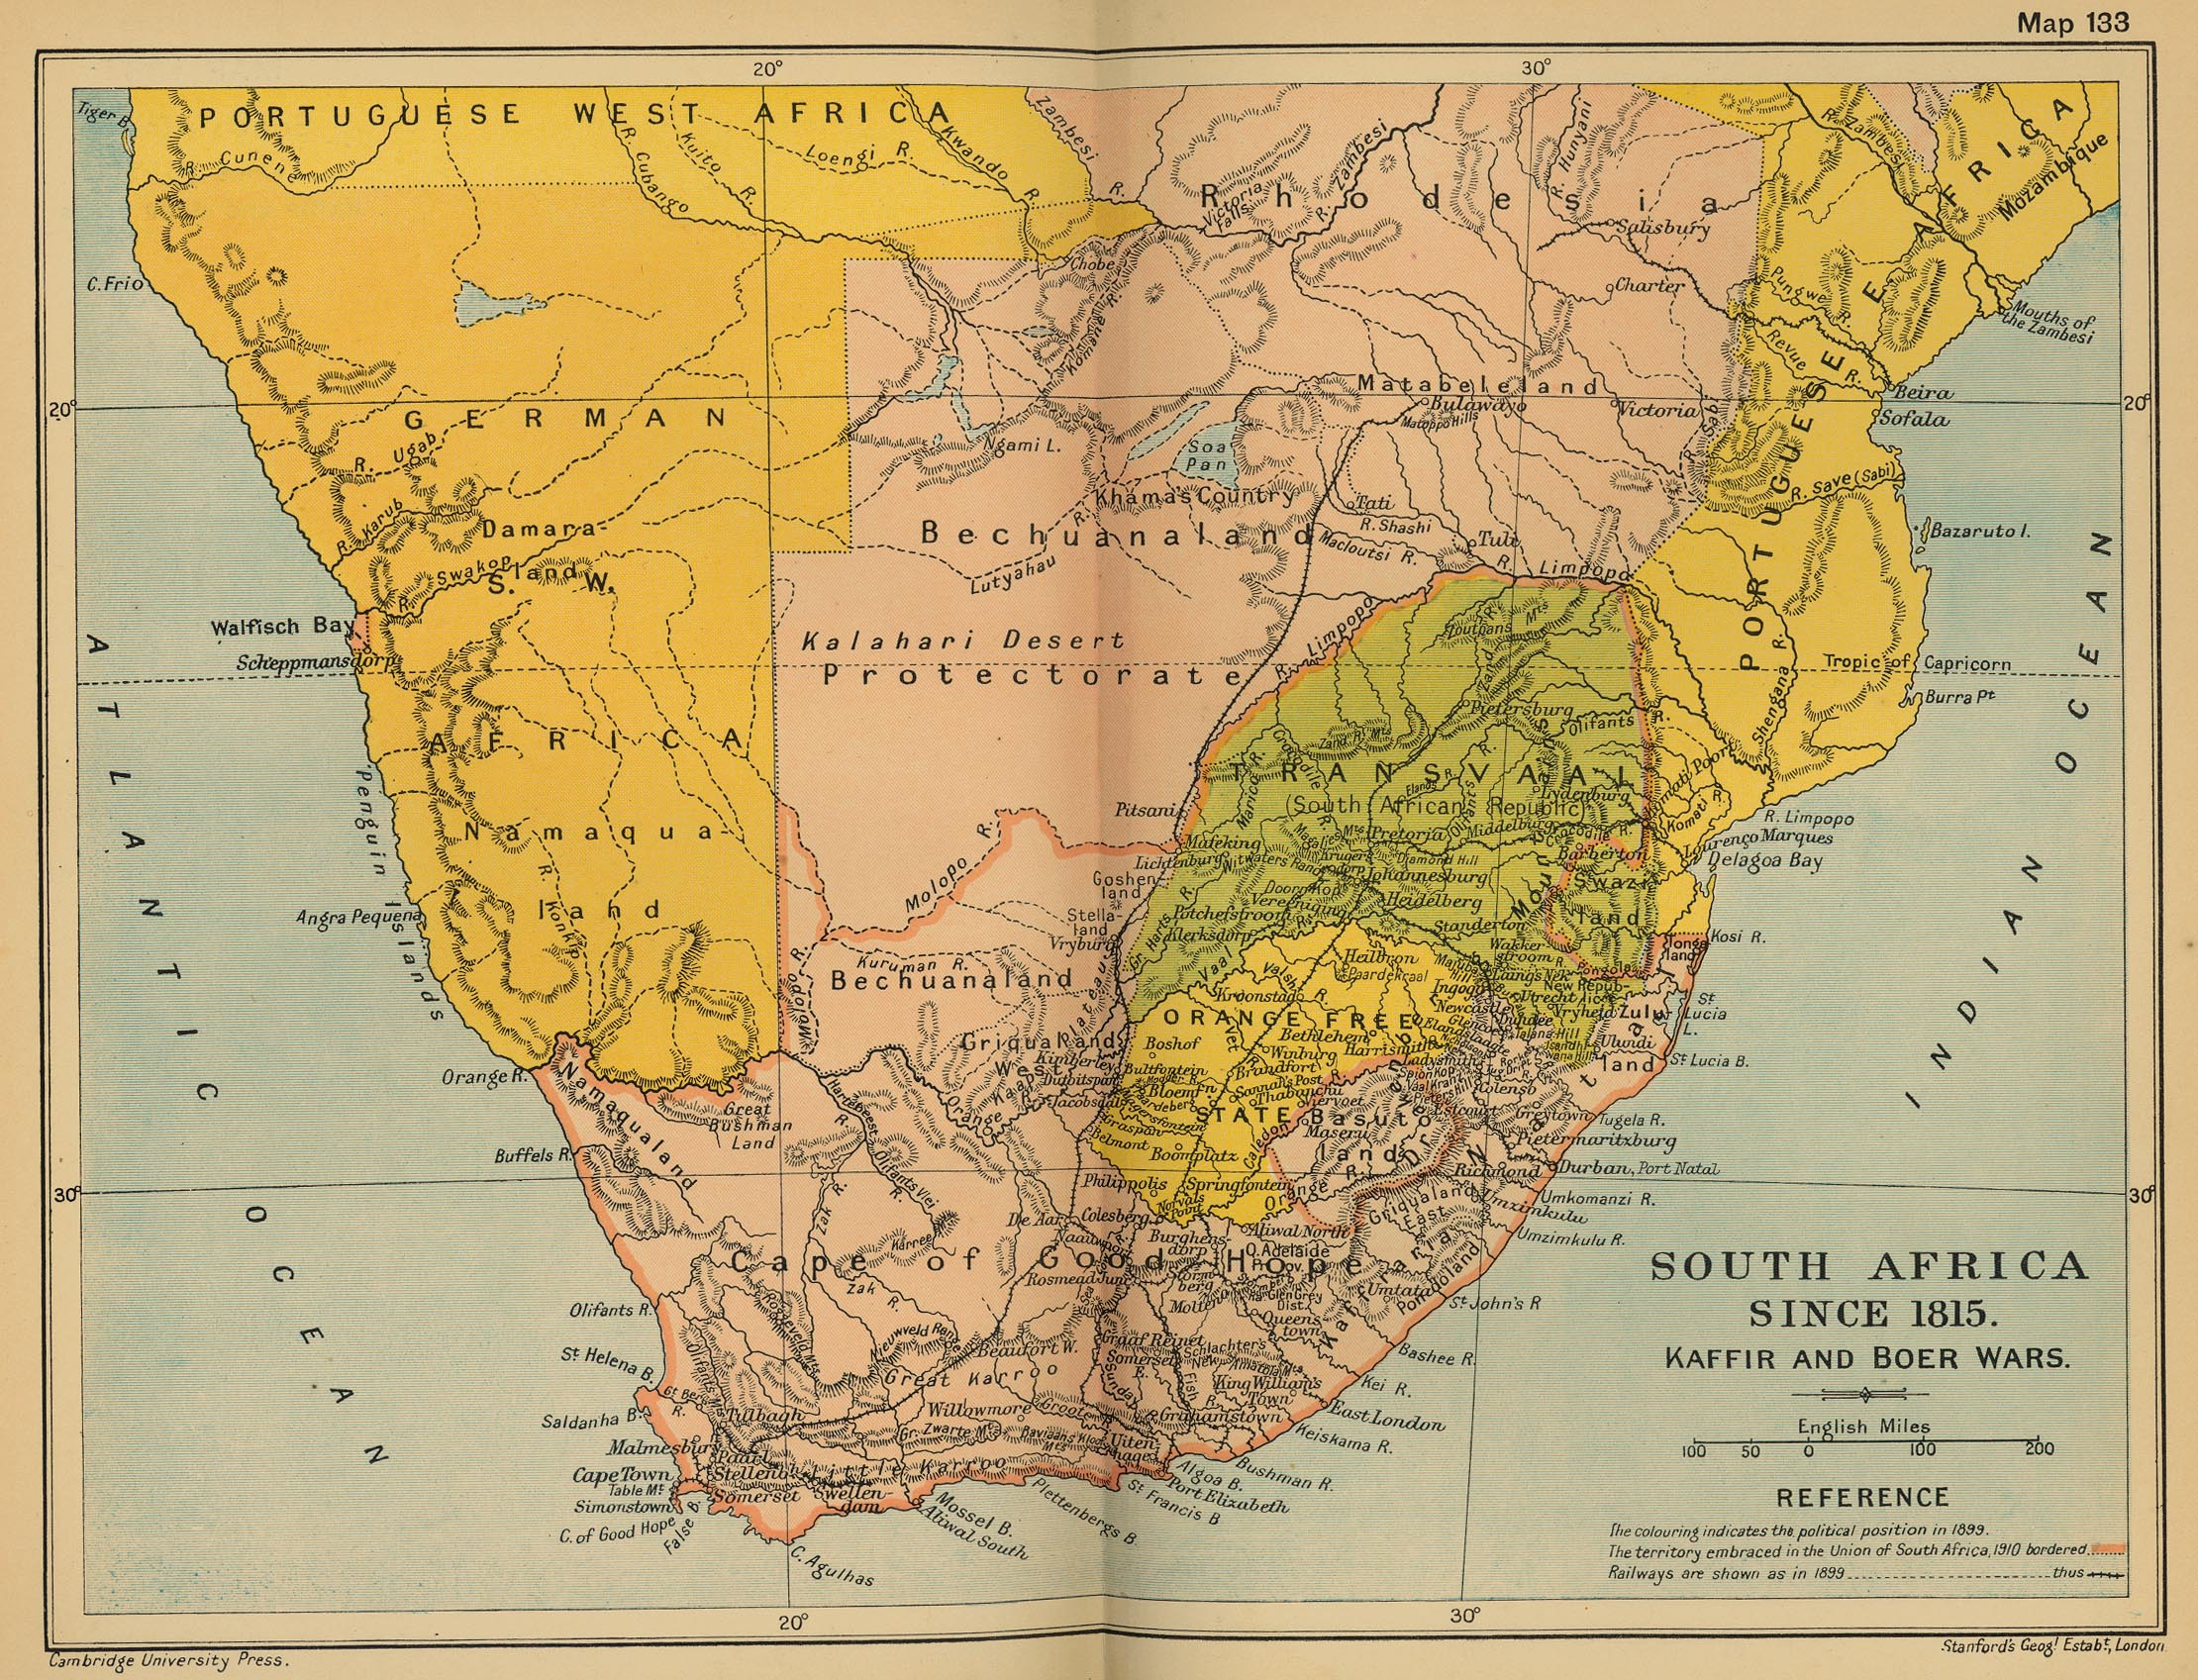 Map of South Africa since 1815: The Kaffir and Boer Wars